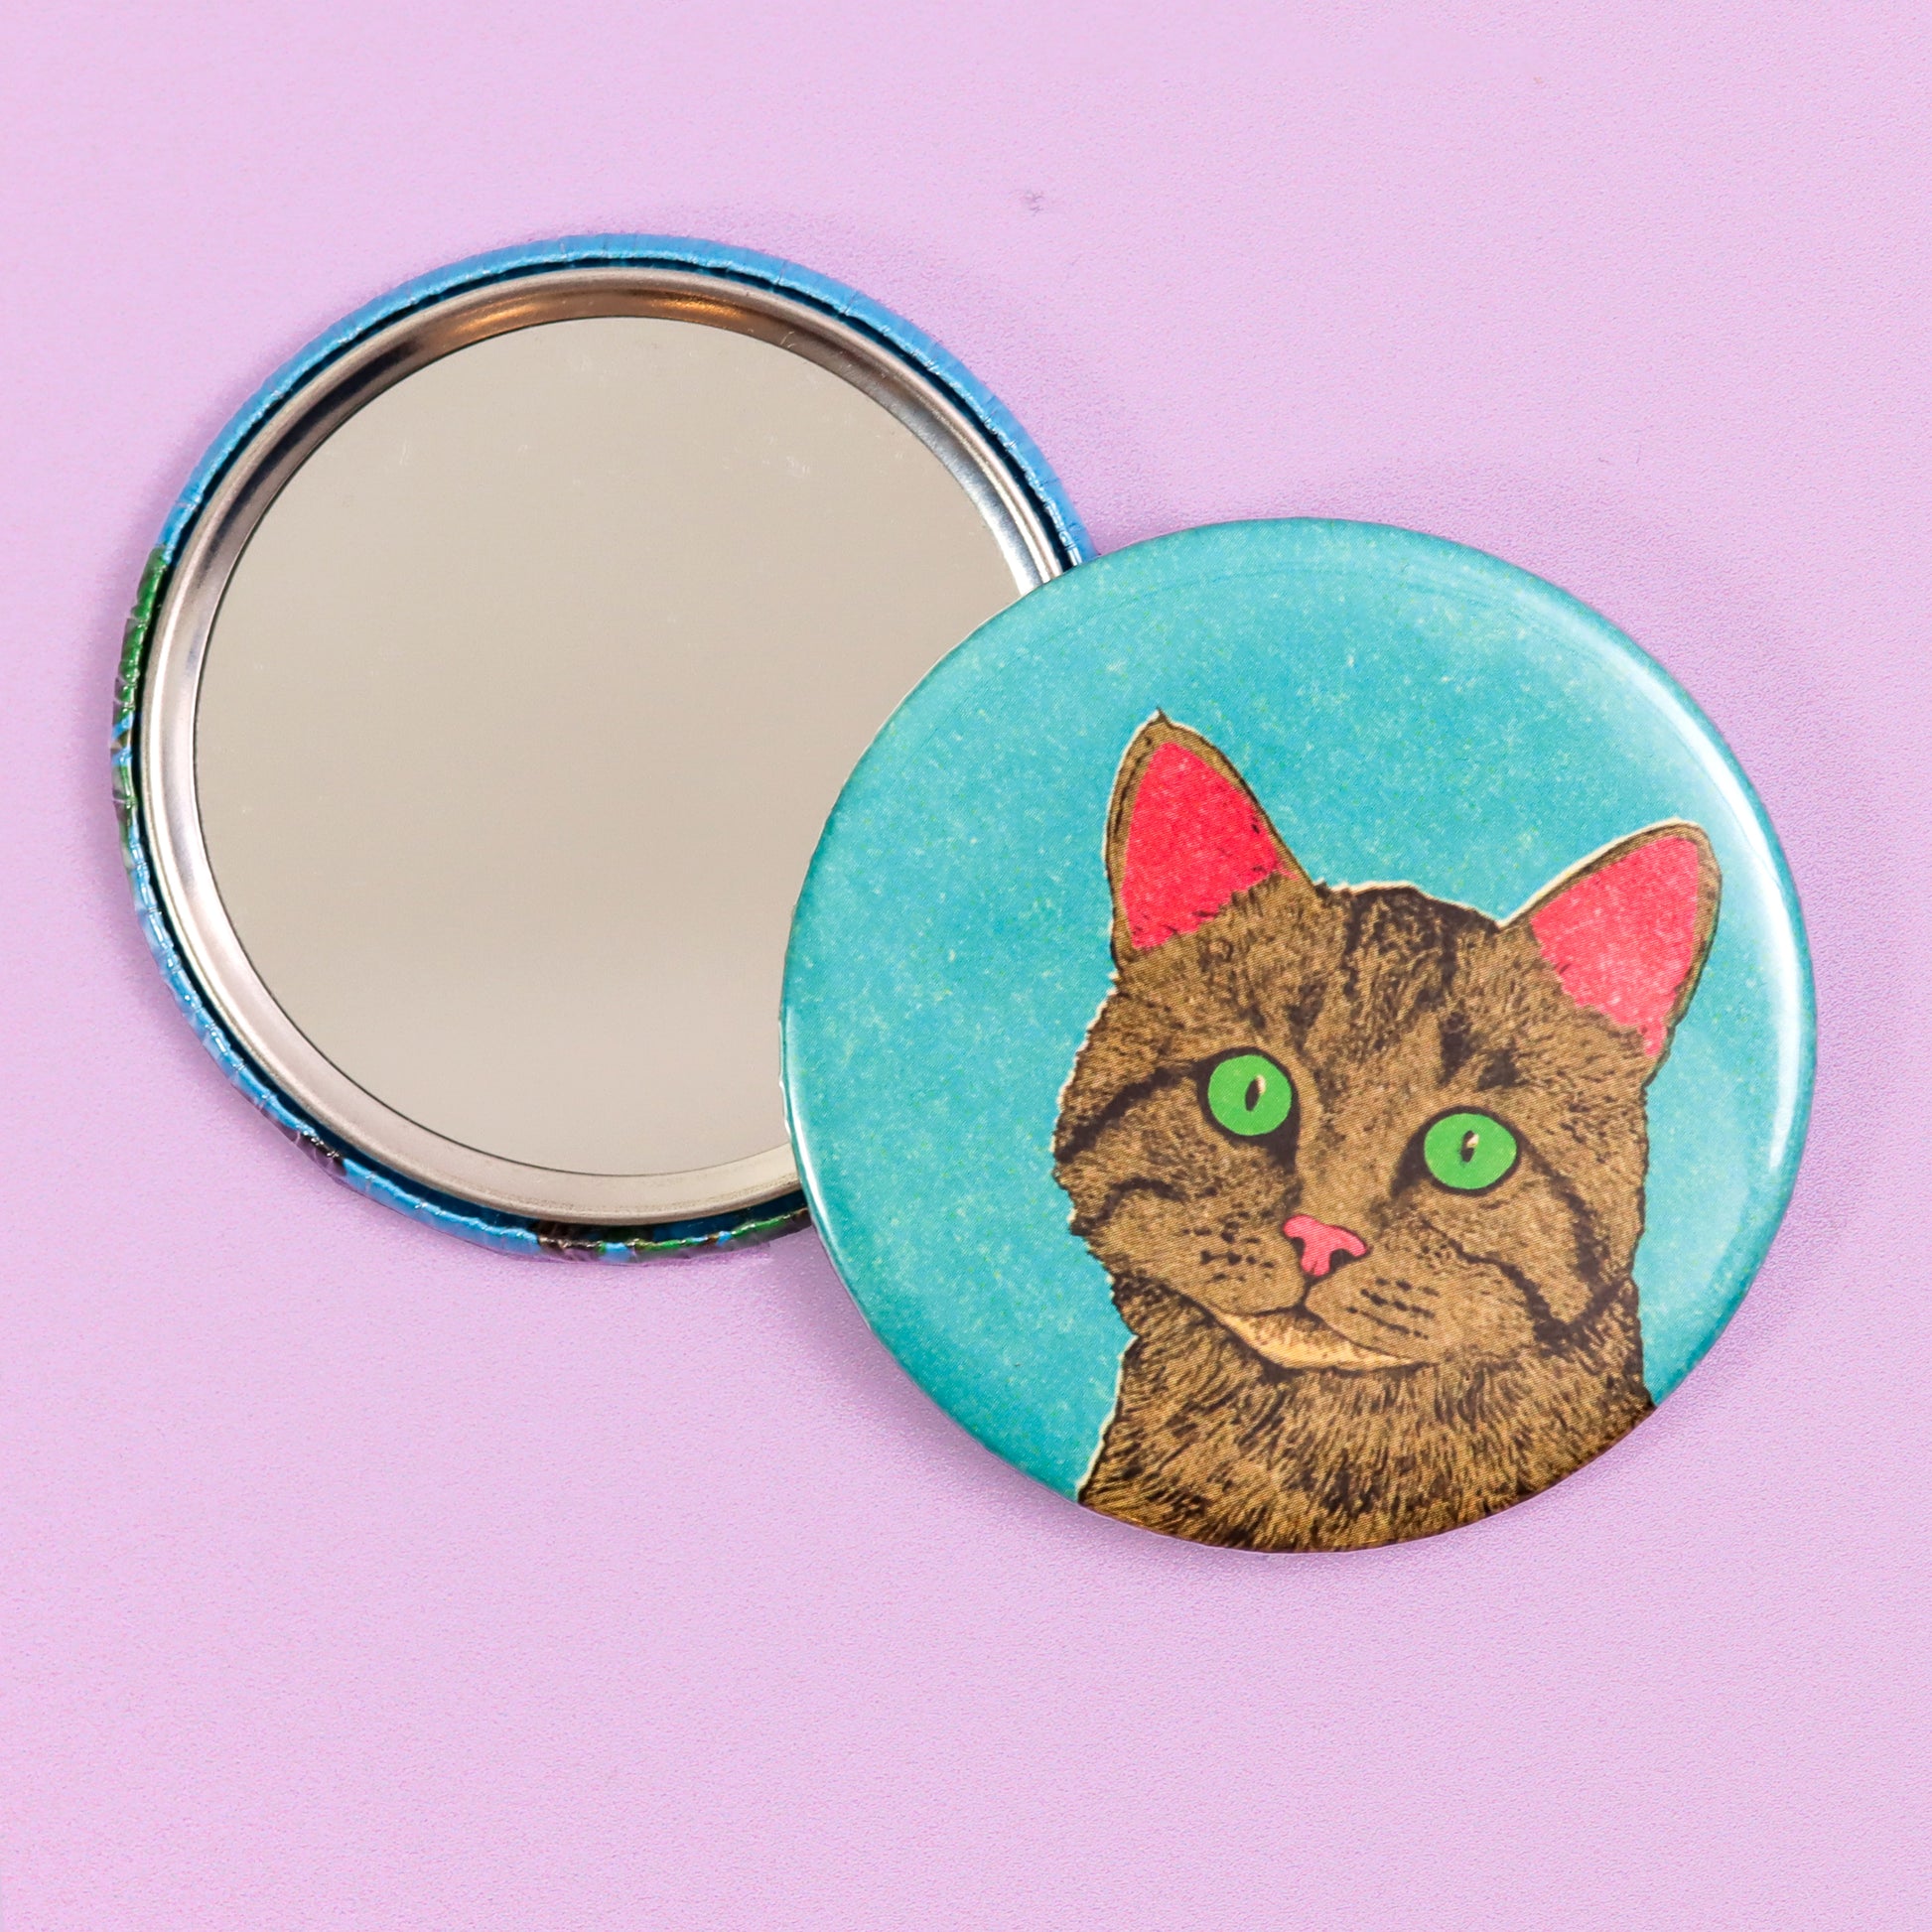 Curious Cat Pocket Mirror - Fawn and Thistle